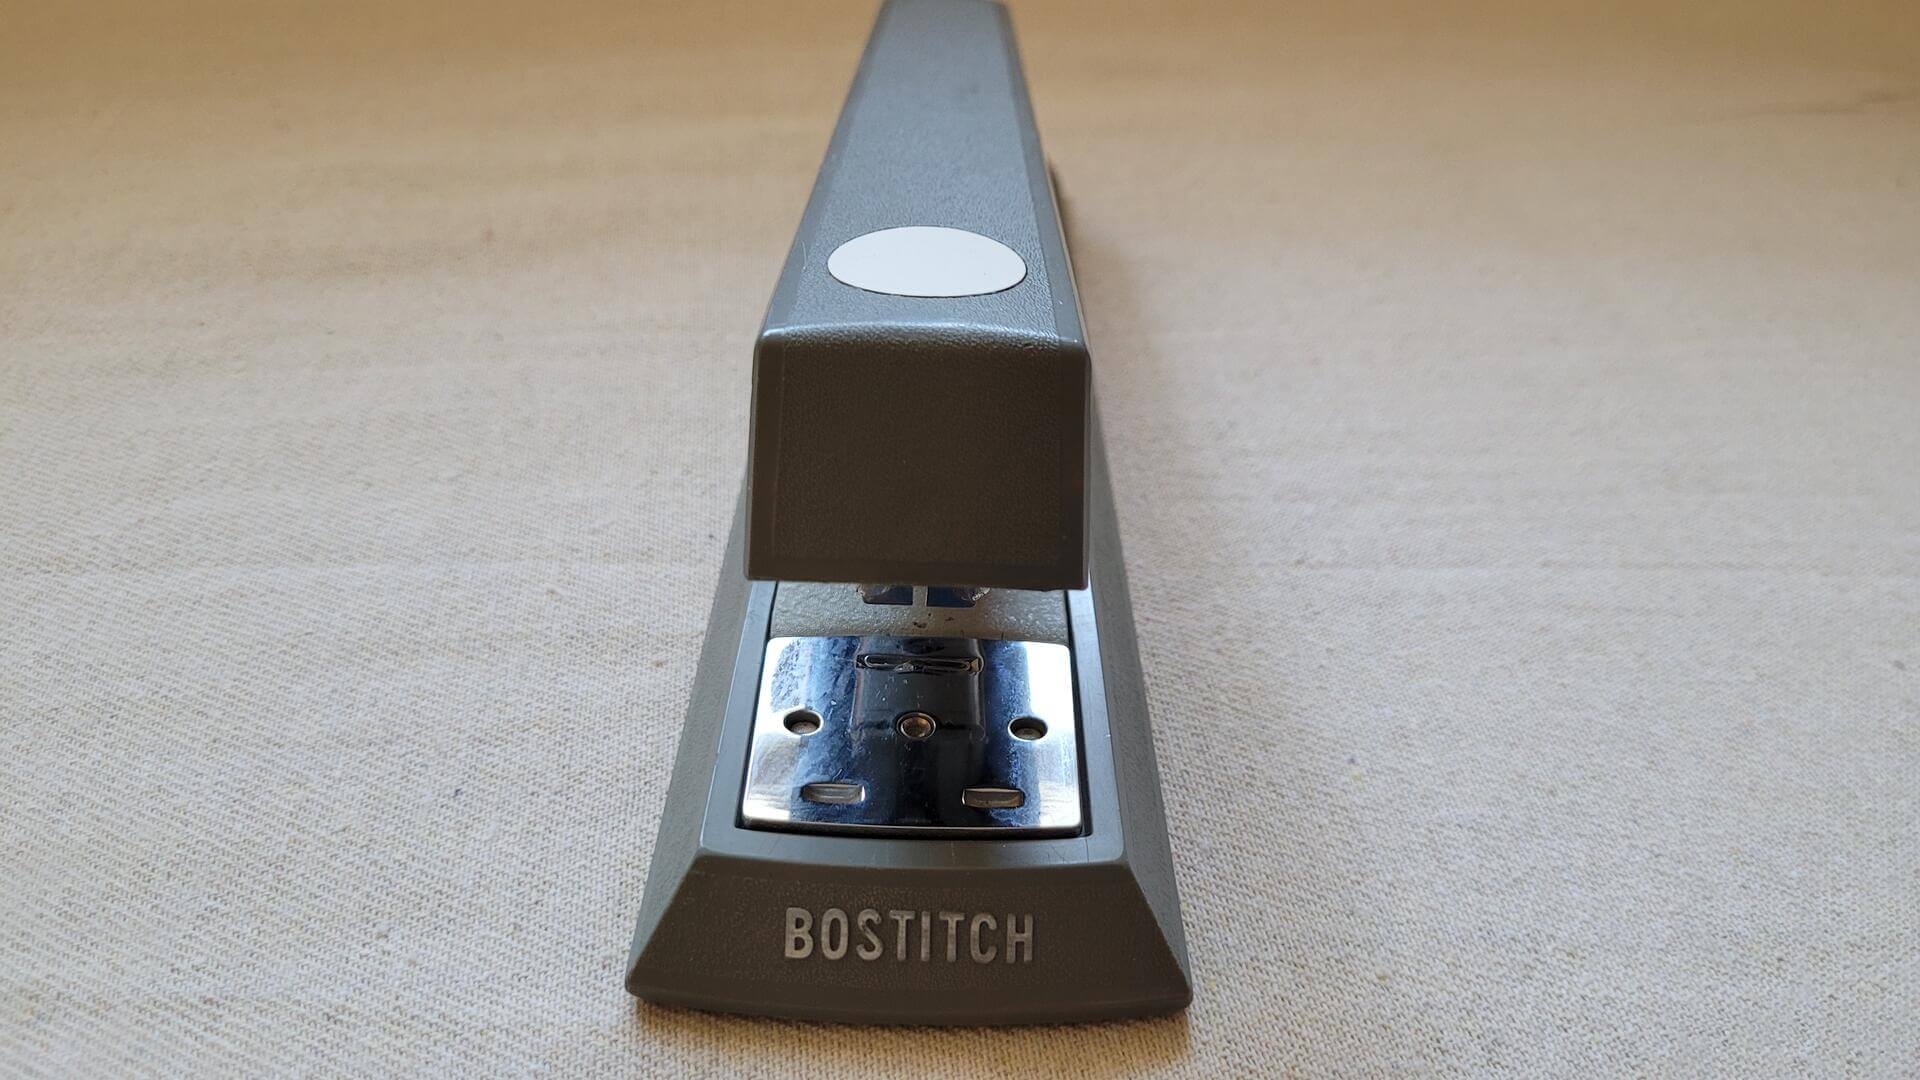 bostitch-stapler-model-b-III-gray-and-white-color-standard-staples-retro-vintage-made-in-usa-collectible-office-tools-and-equipment-front-view